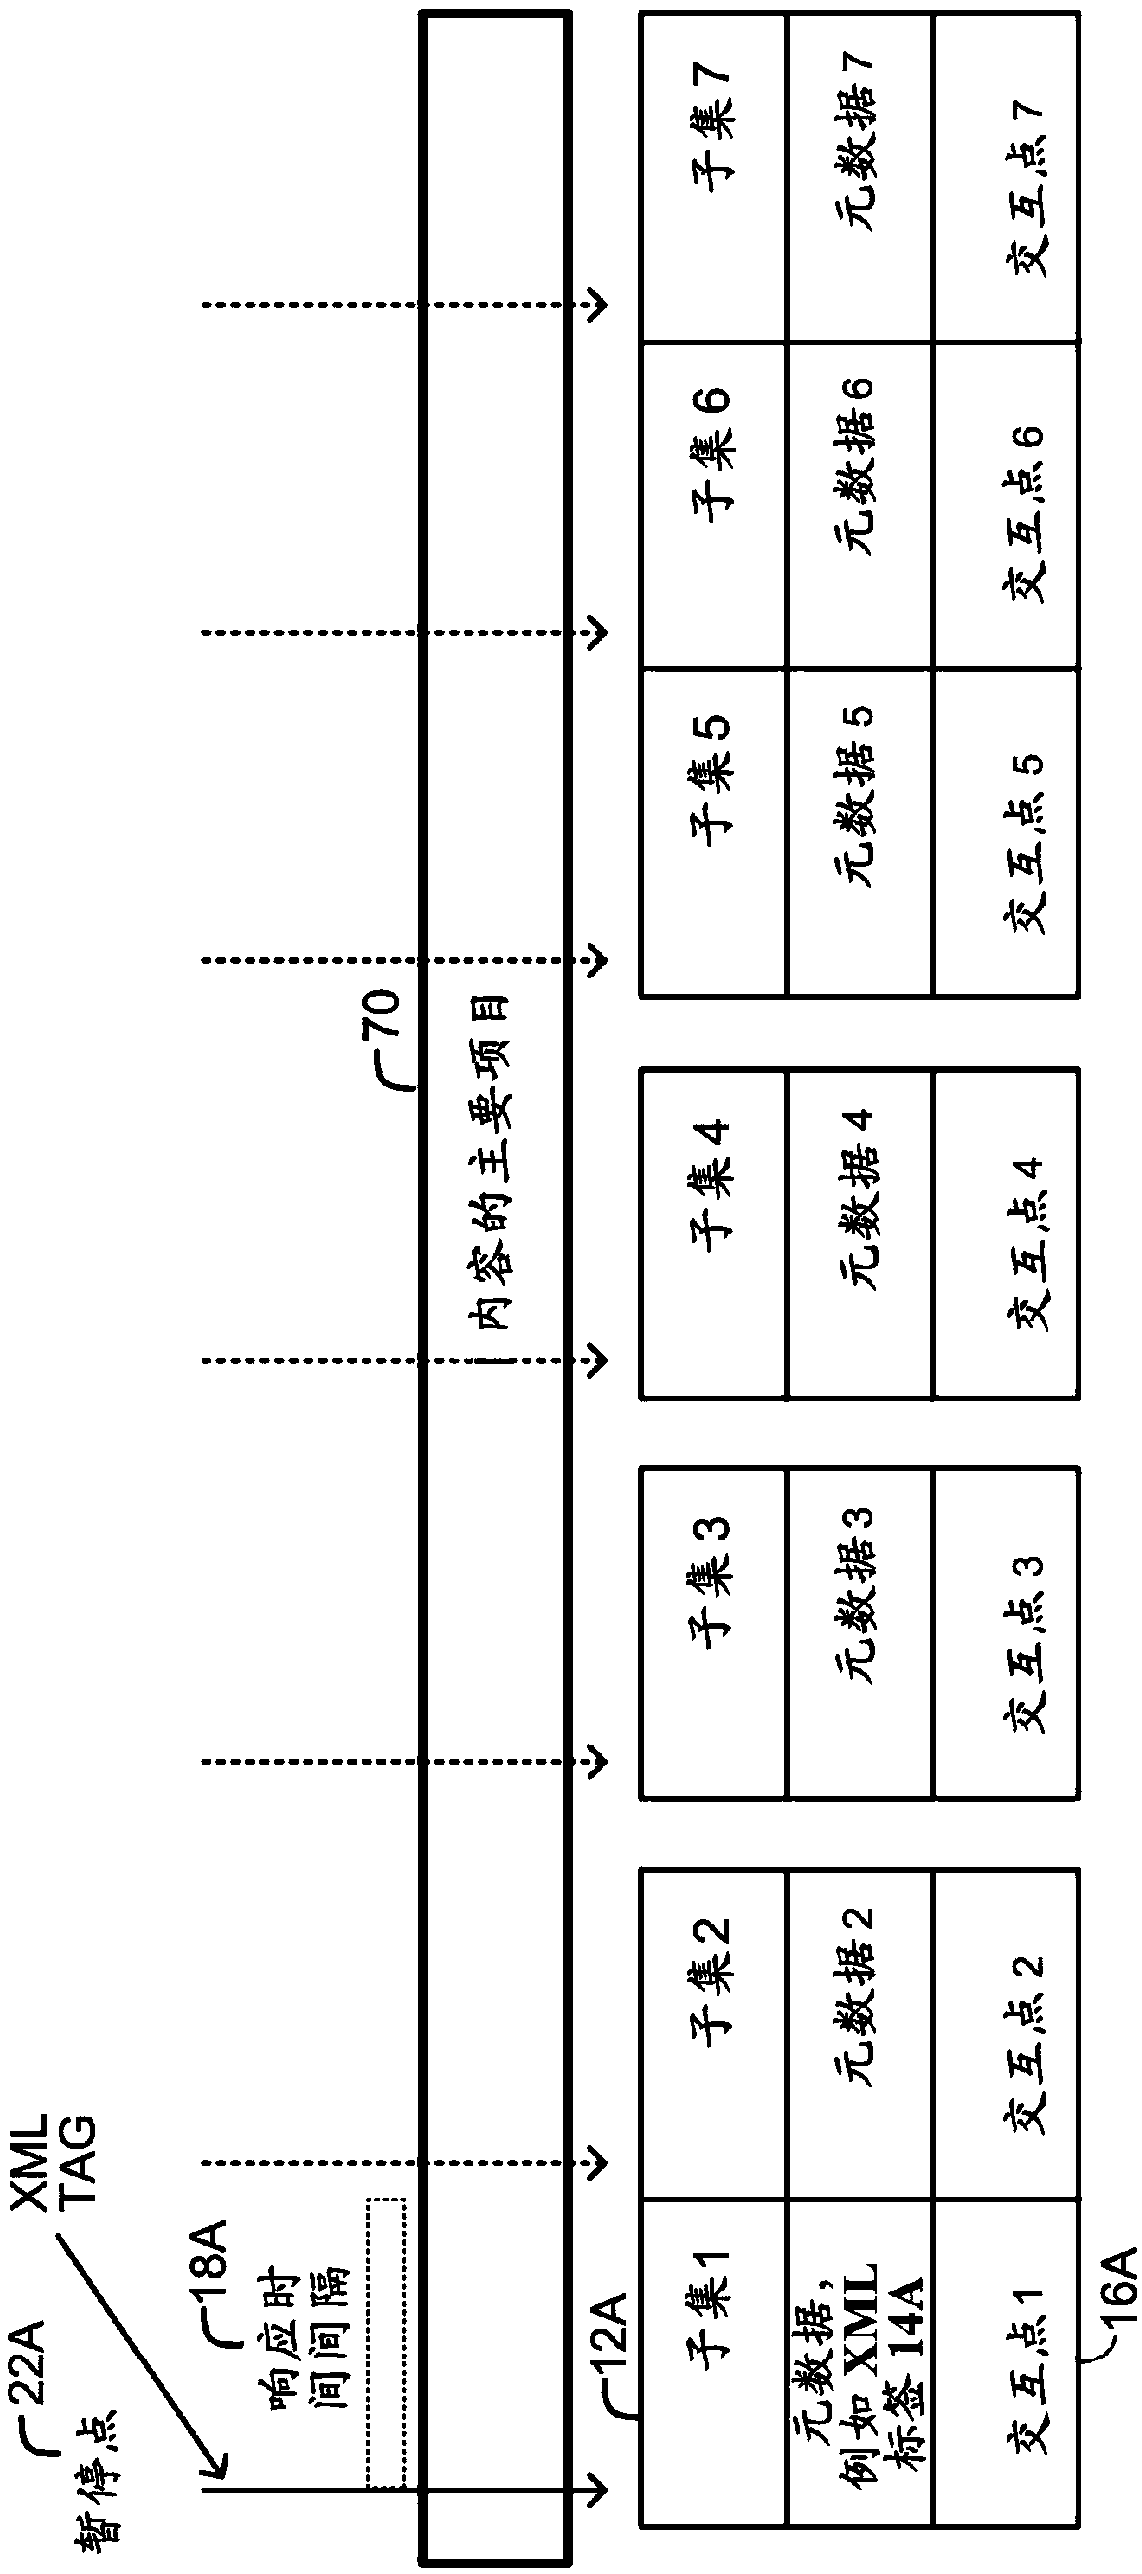 System and method for optimized and efficient interactive experience